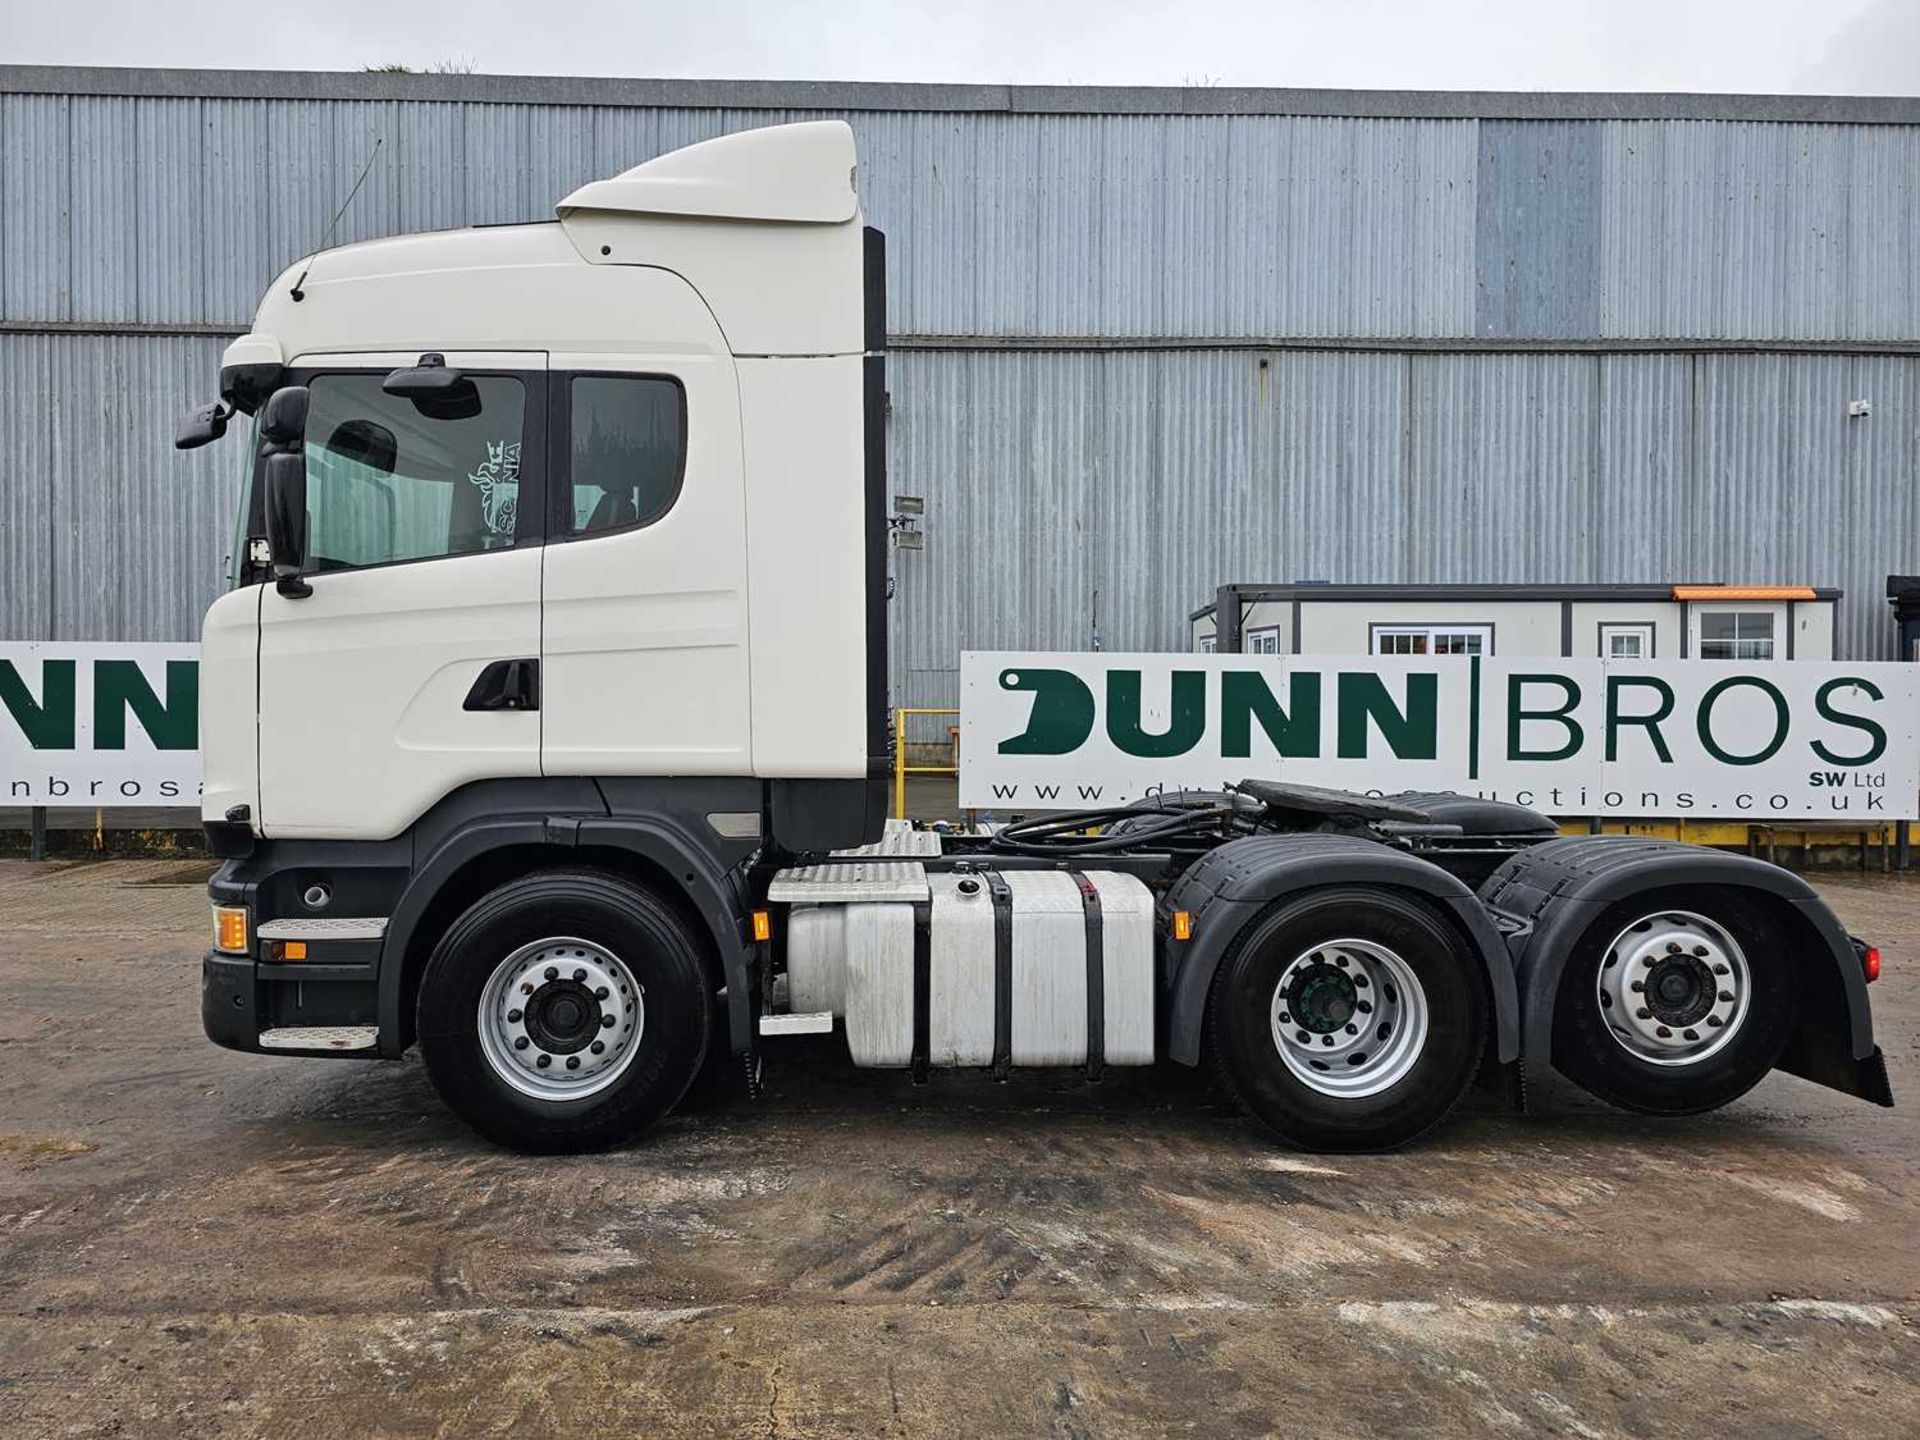 2014 Scania R450 6x2 Rear Lift, Tipping Gear, Blind Spot Camera, A/C, Automatic Gearbox - Image 2 of 22